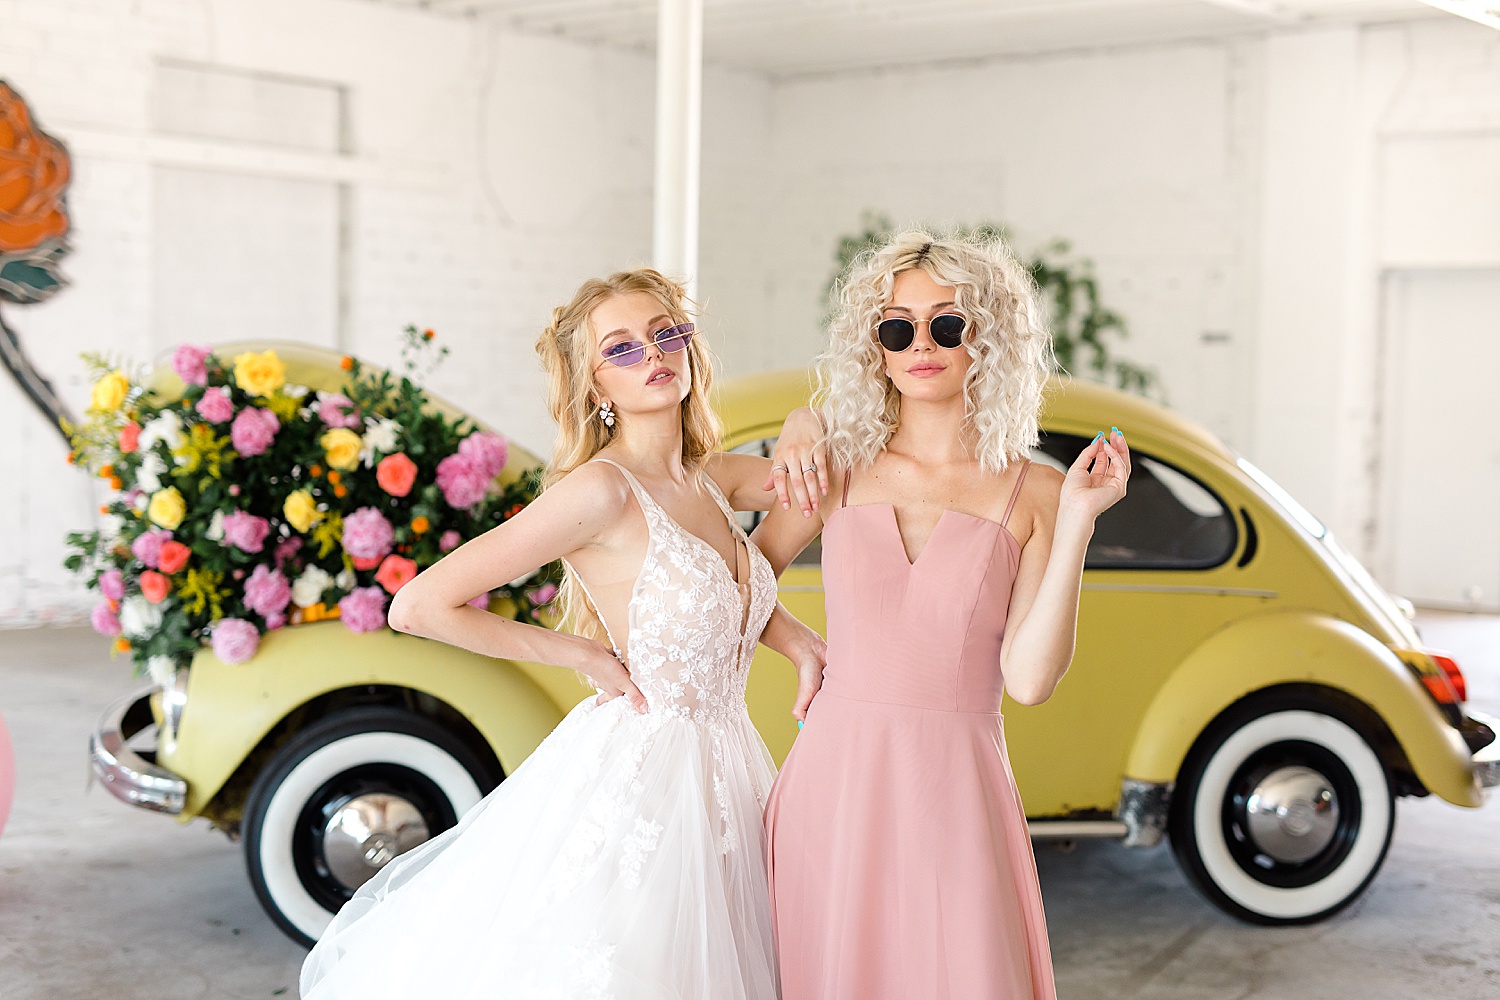 Bride and bridesmaid in sunglasses for this light and airy styled session 